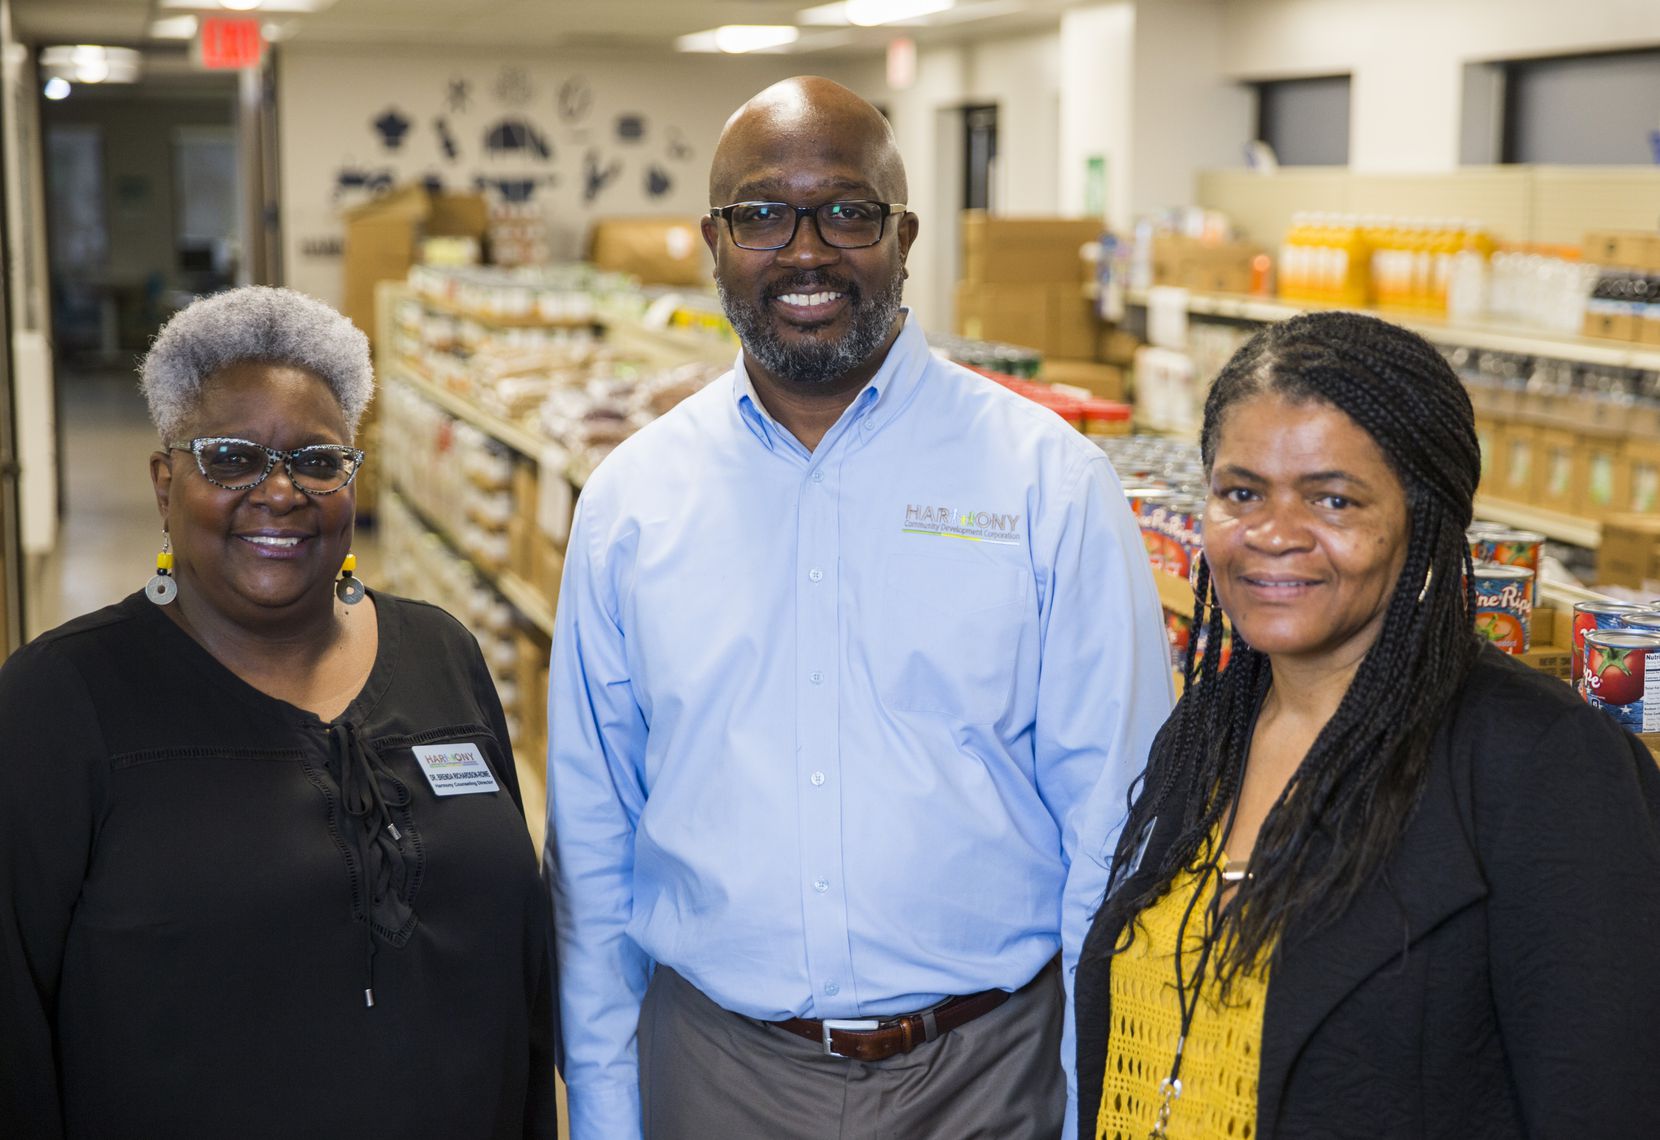 From left: Dr. Brenda Richardson Rowe joins Executive Director Mark Porter and Program Director Candy Bradshaw in the food pantry at Harmony Community Development Corp.